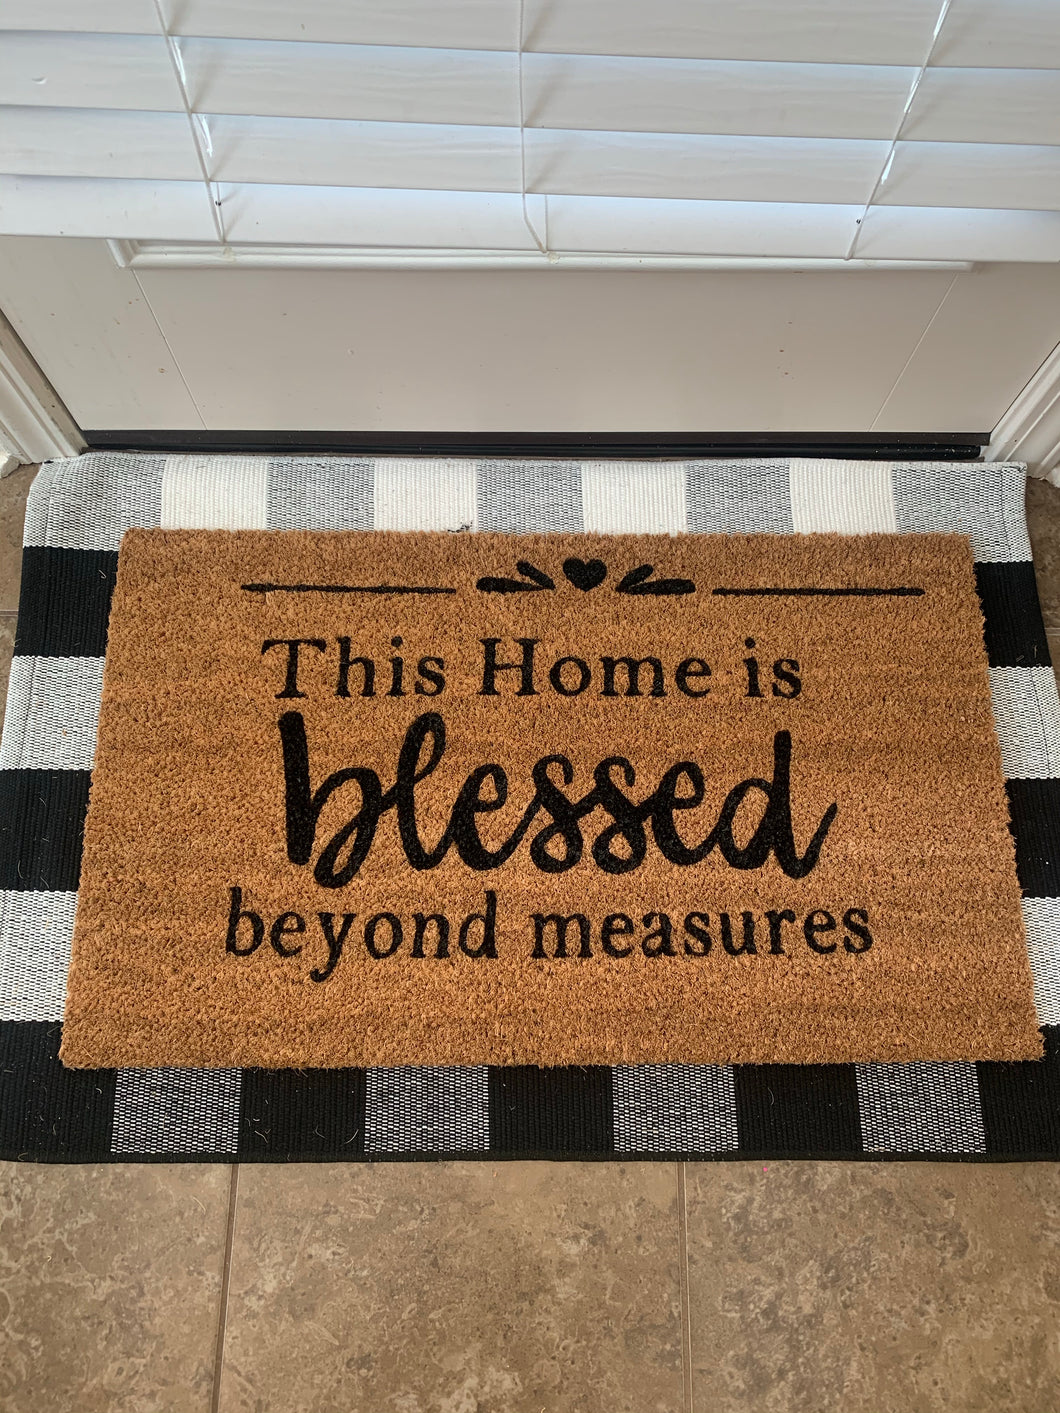 This home is blessed